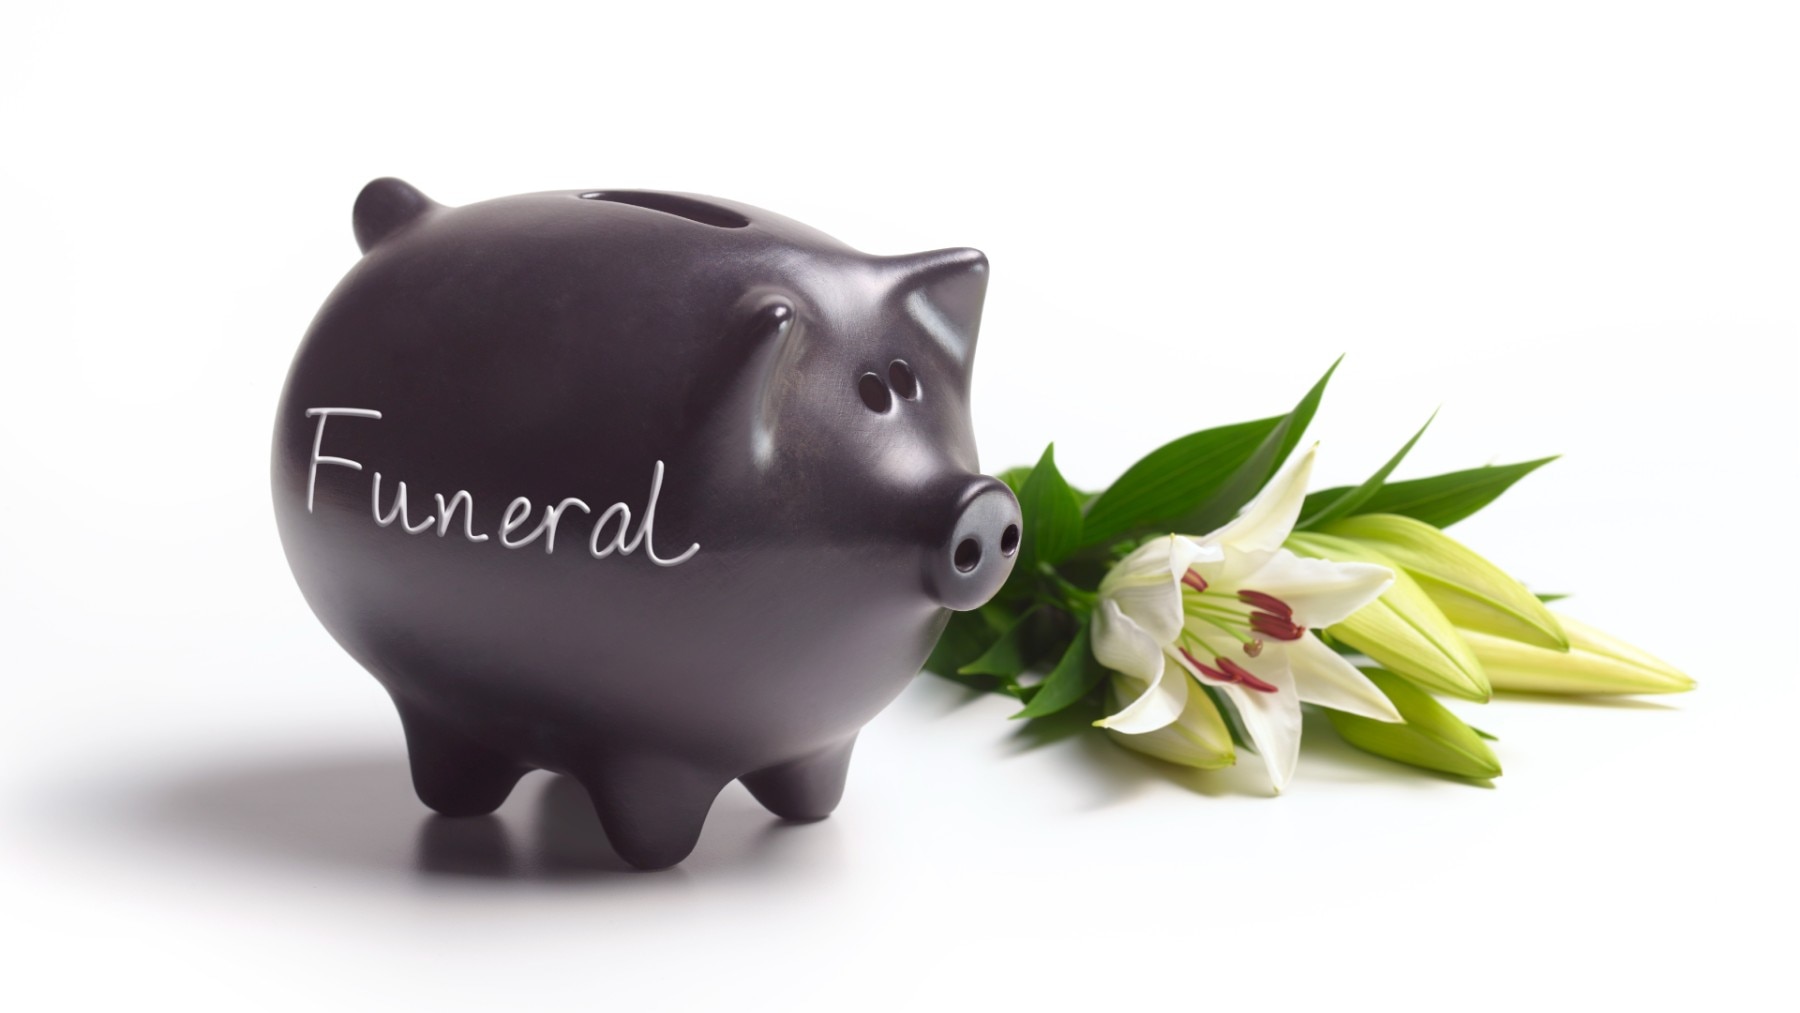 Funerals can be costly